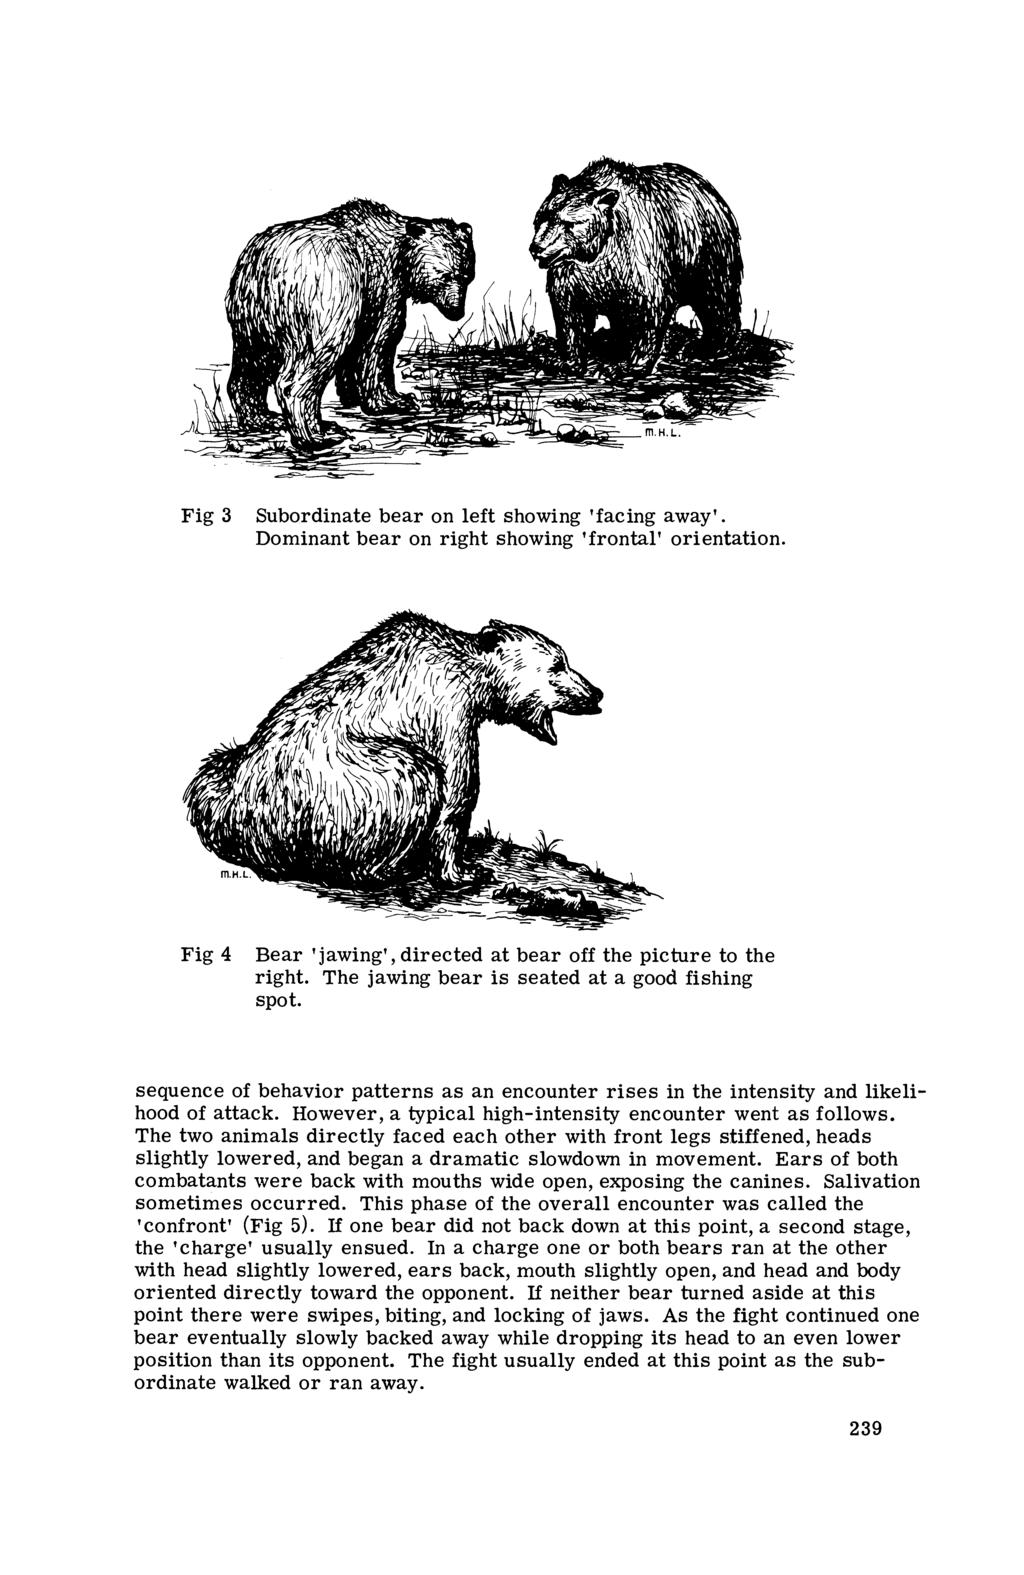 Fig 3 Subordinate bear on left showing 'facing away'. Dominant bear on right showing 'frontal' orientation. Fig 4 Bear 'jawing', directed at bear off the picture to the right.